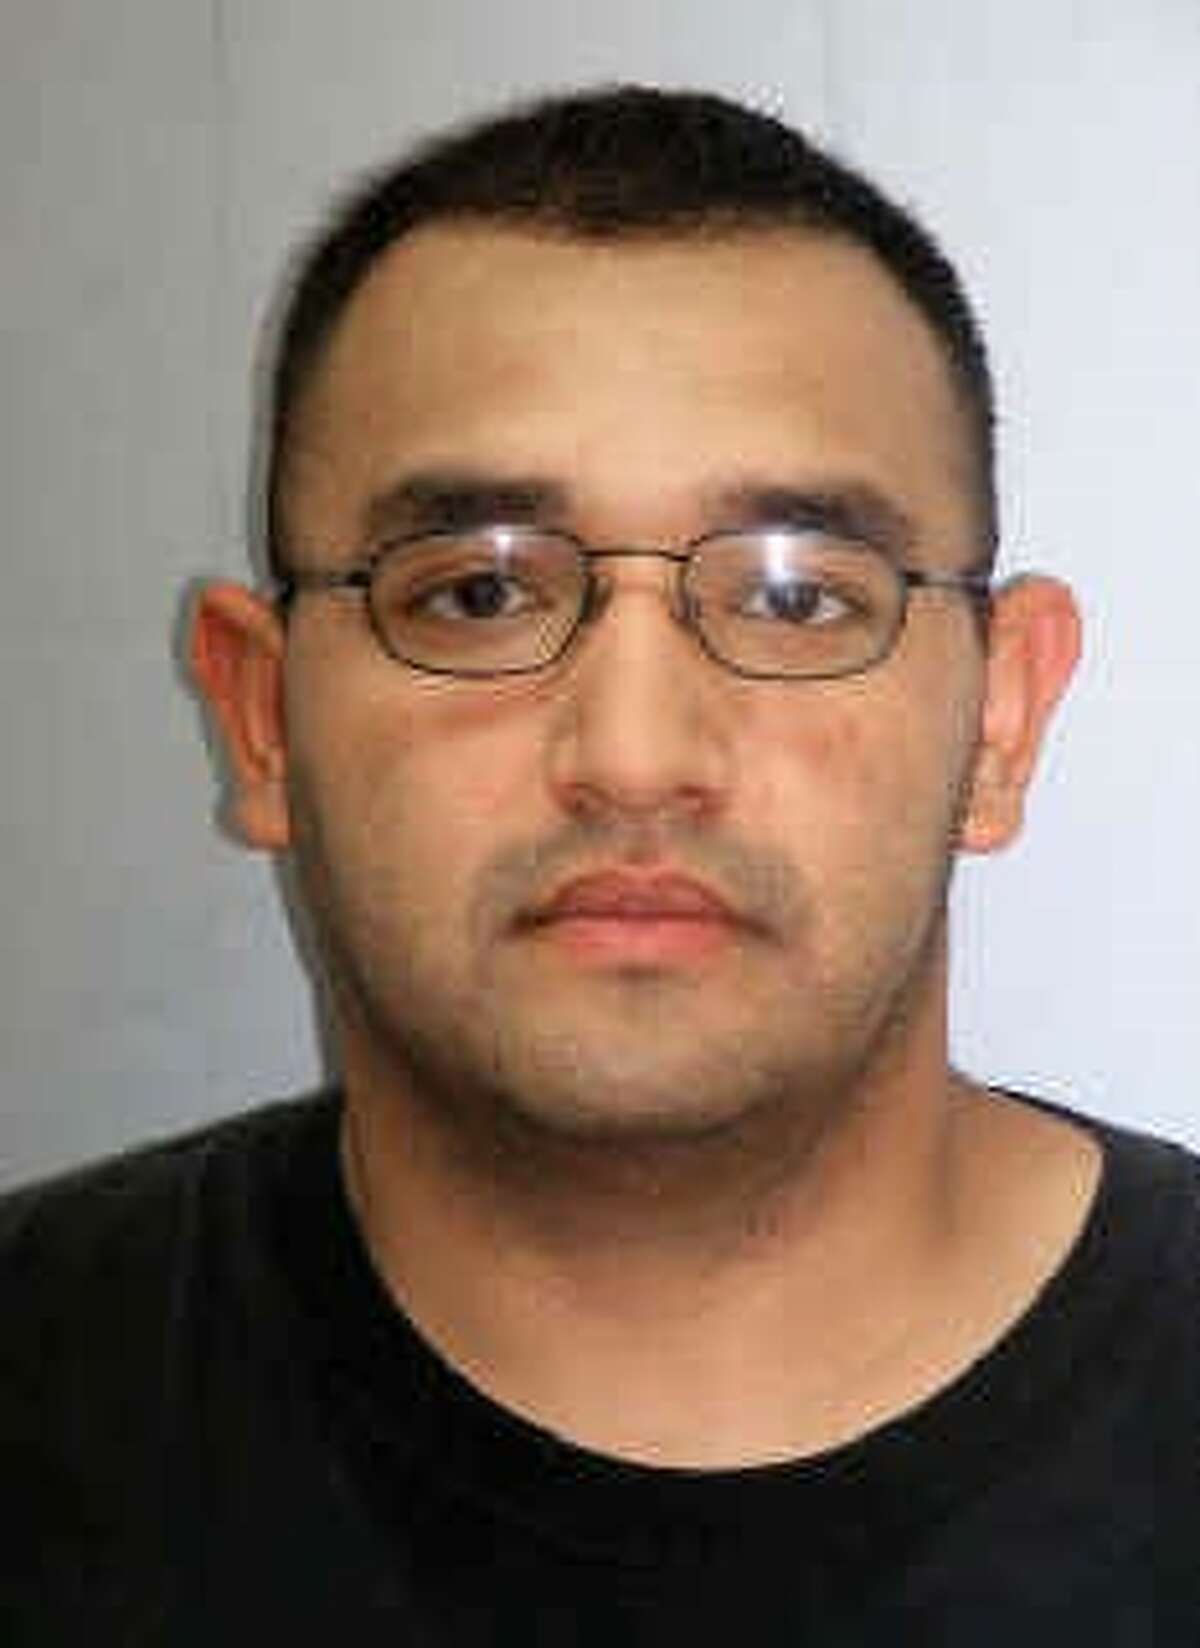 Erick Montez, then 35, a Bexar County Sheriff's deputy with the detention division since 2008, was arrested on charges of sexual assault and violation of civil rights of a person in custody on Jan. 12, 2016.